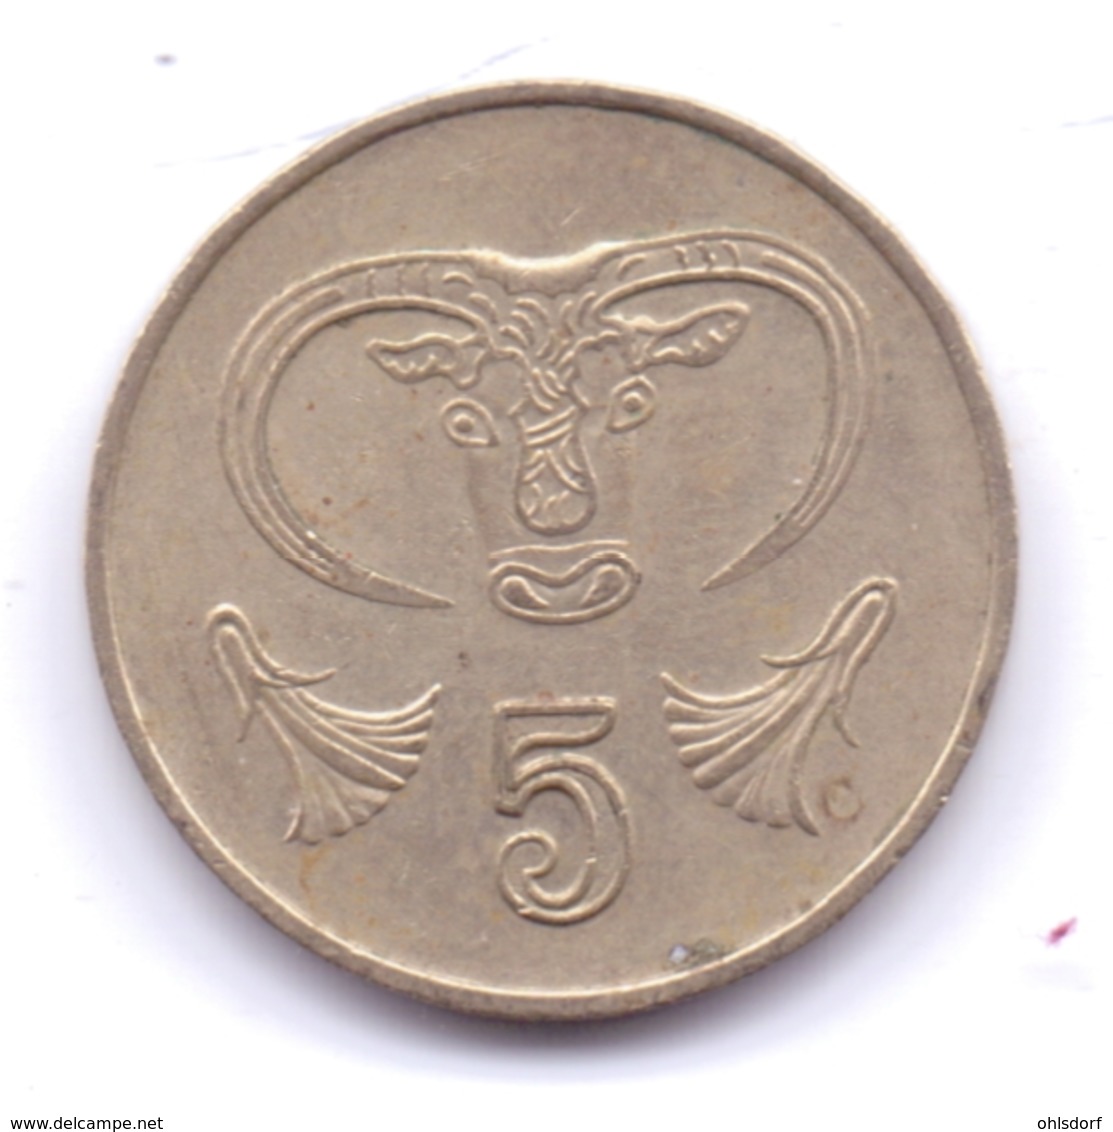 CYPRUS 1985: 5 Cents, KM 55.2 - Chipre